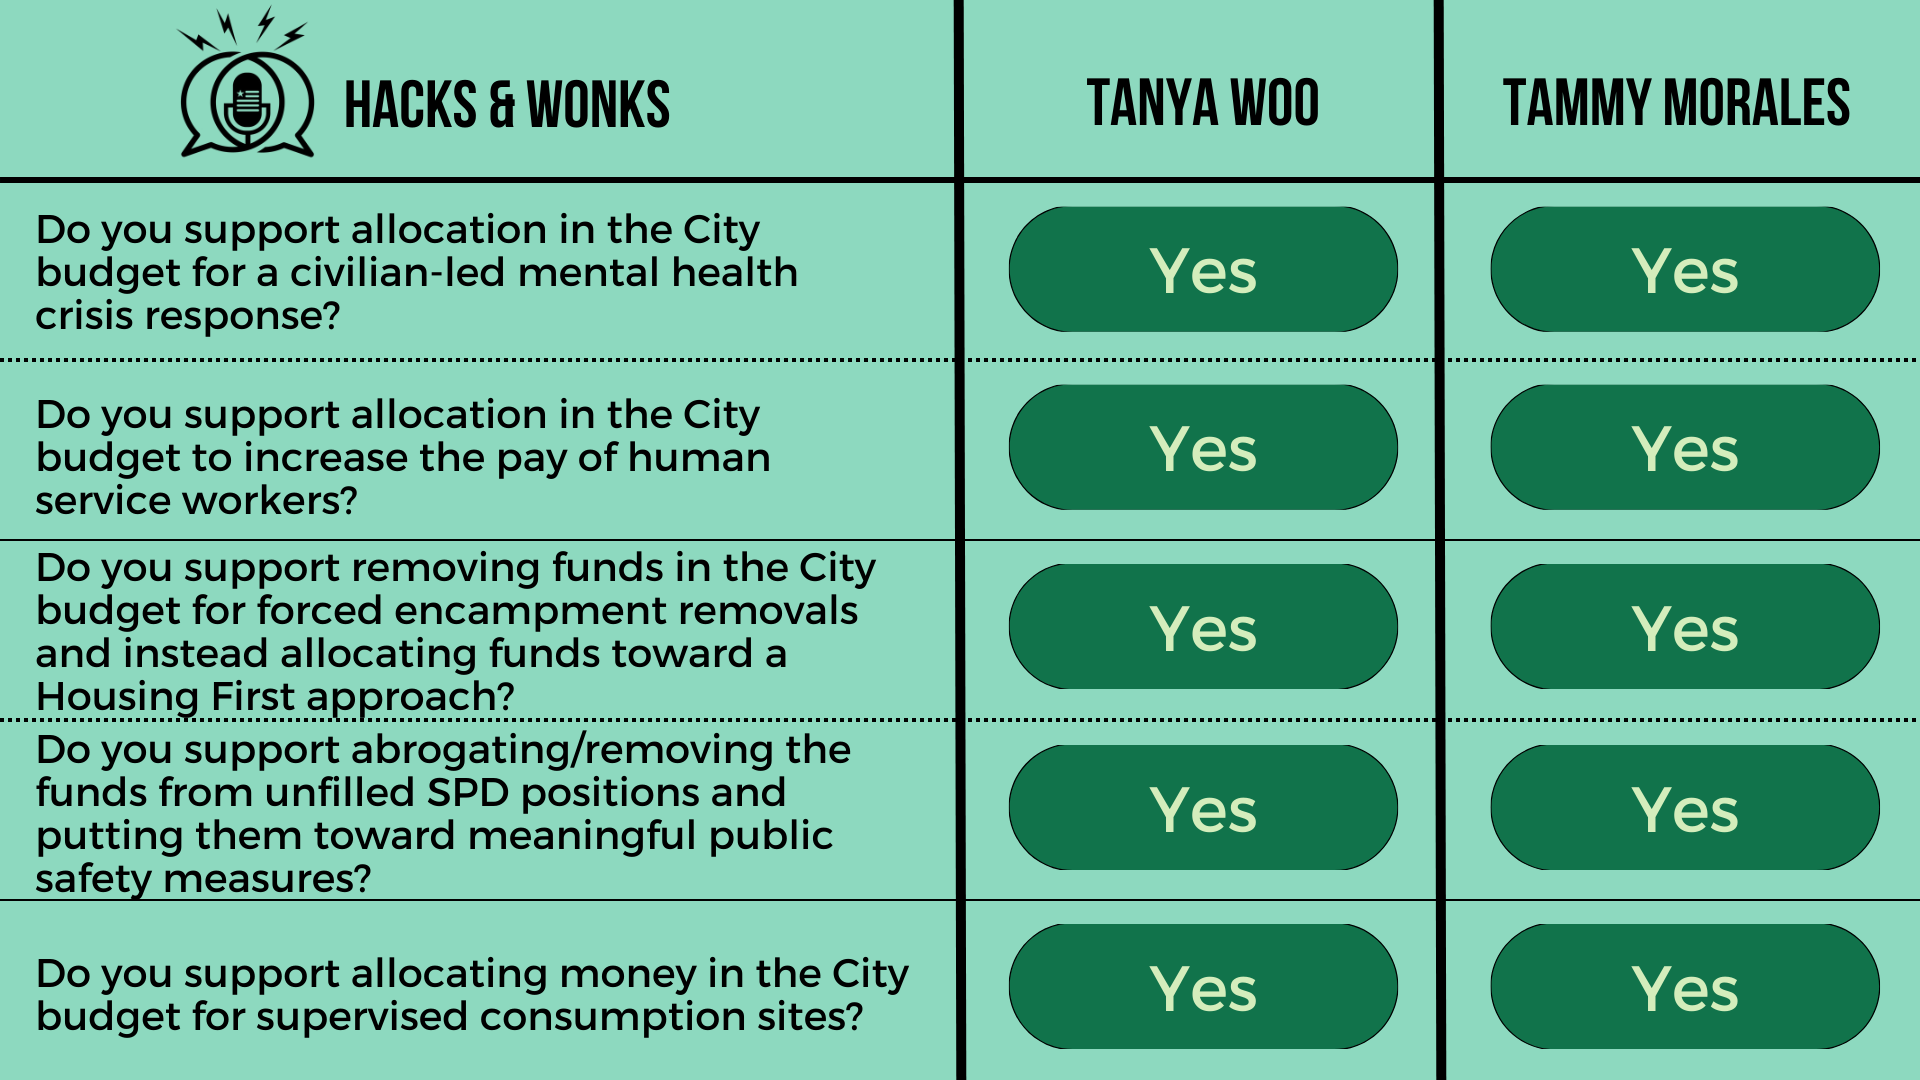 Q: Do you support allocation in the City budget for a civilian-led mental health crisis response? Tanya Woo: Yes, Tammy Morales: Yes  Q: Do you support allocation in the City budget to increase the pay of human service workers? Tanya Woo: Yes, Tammy